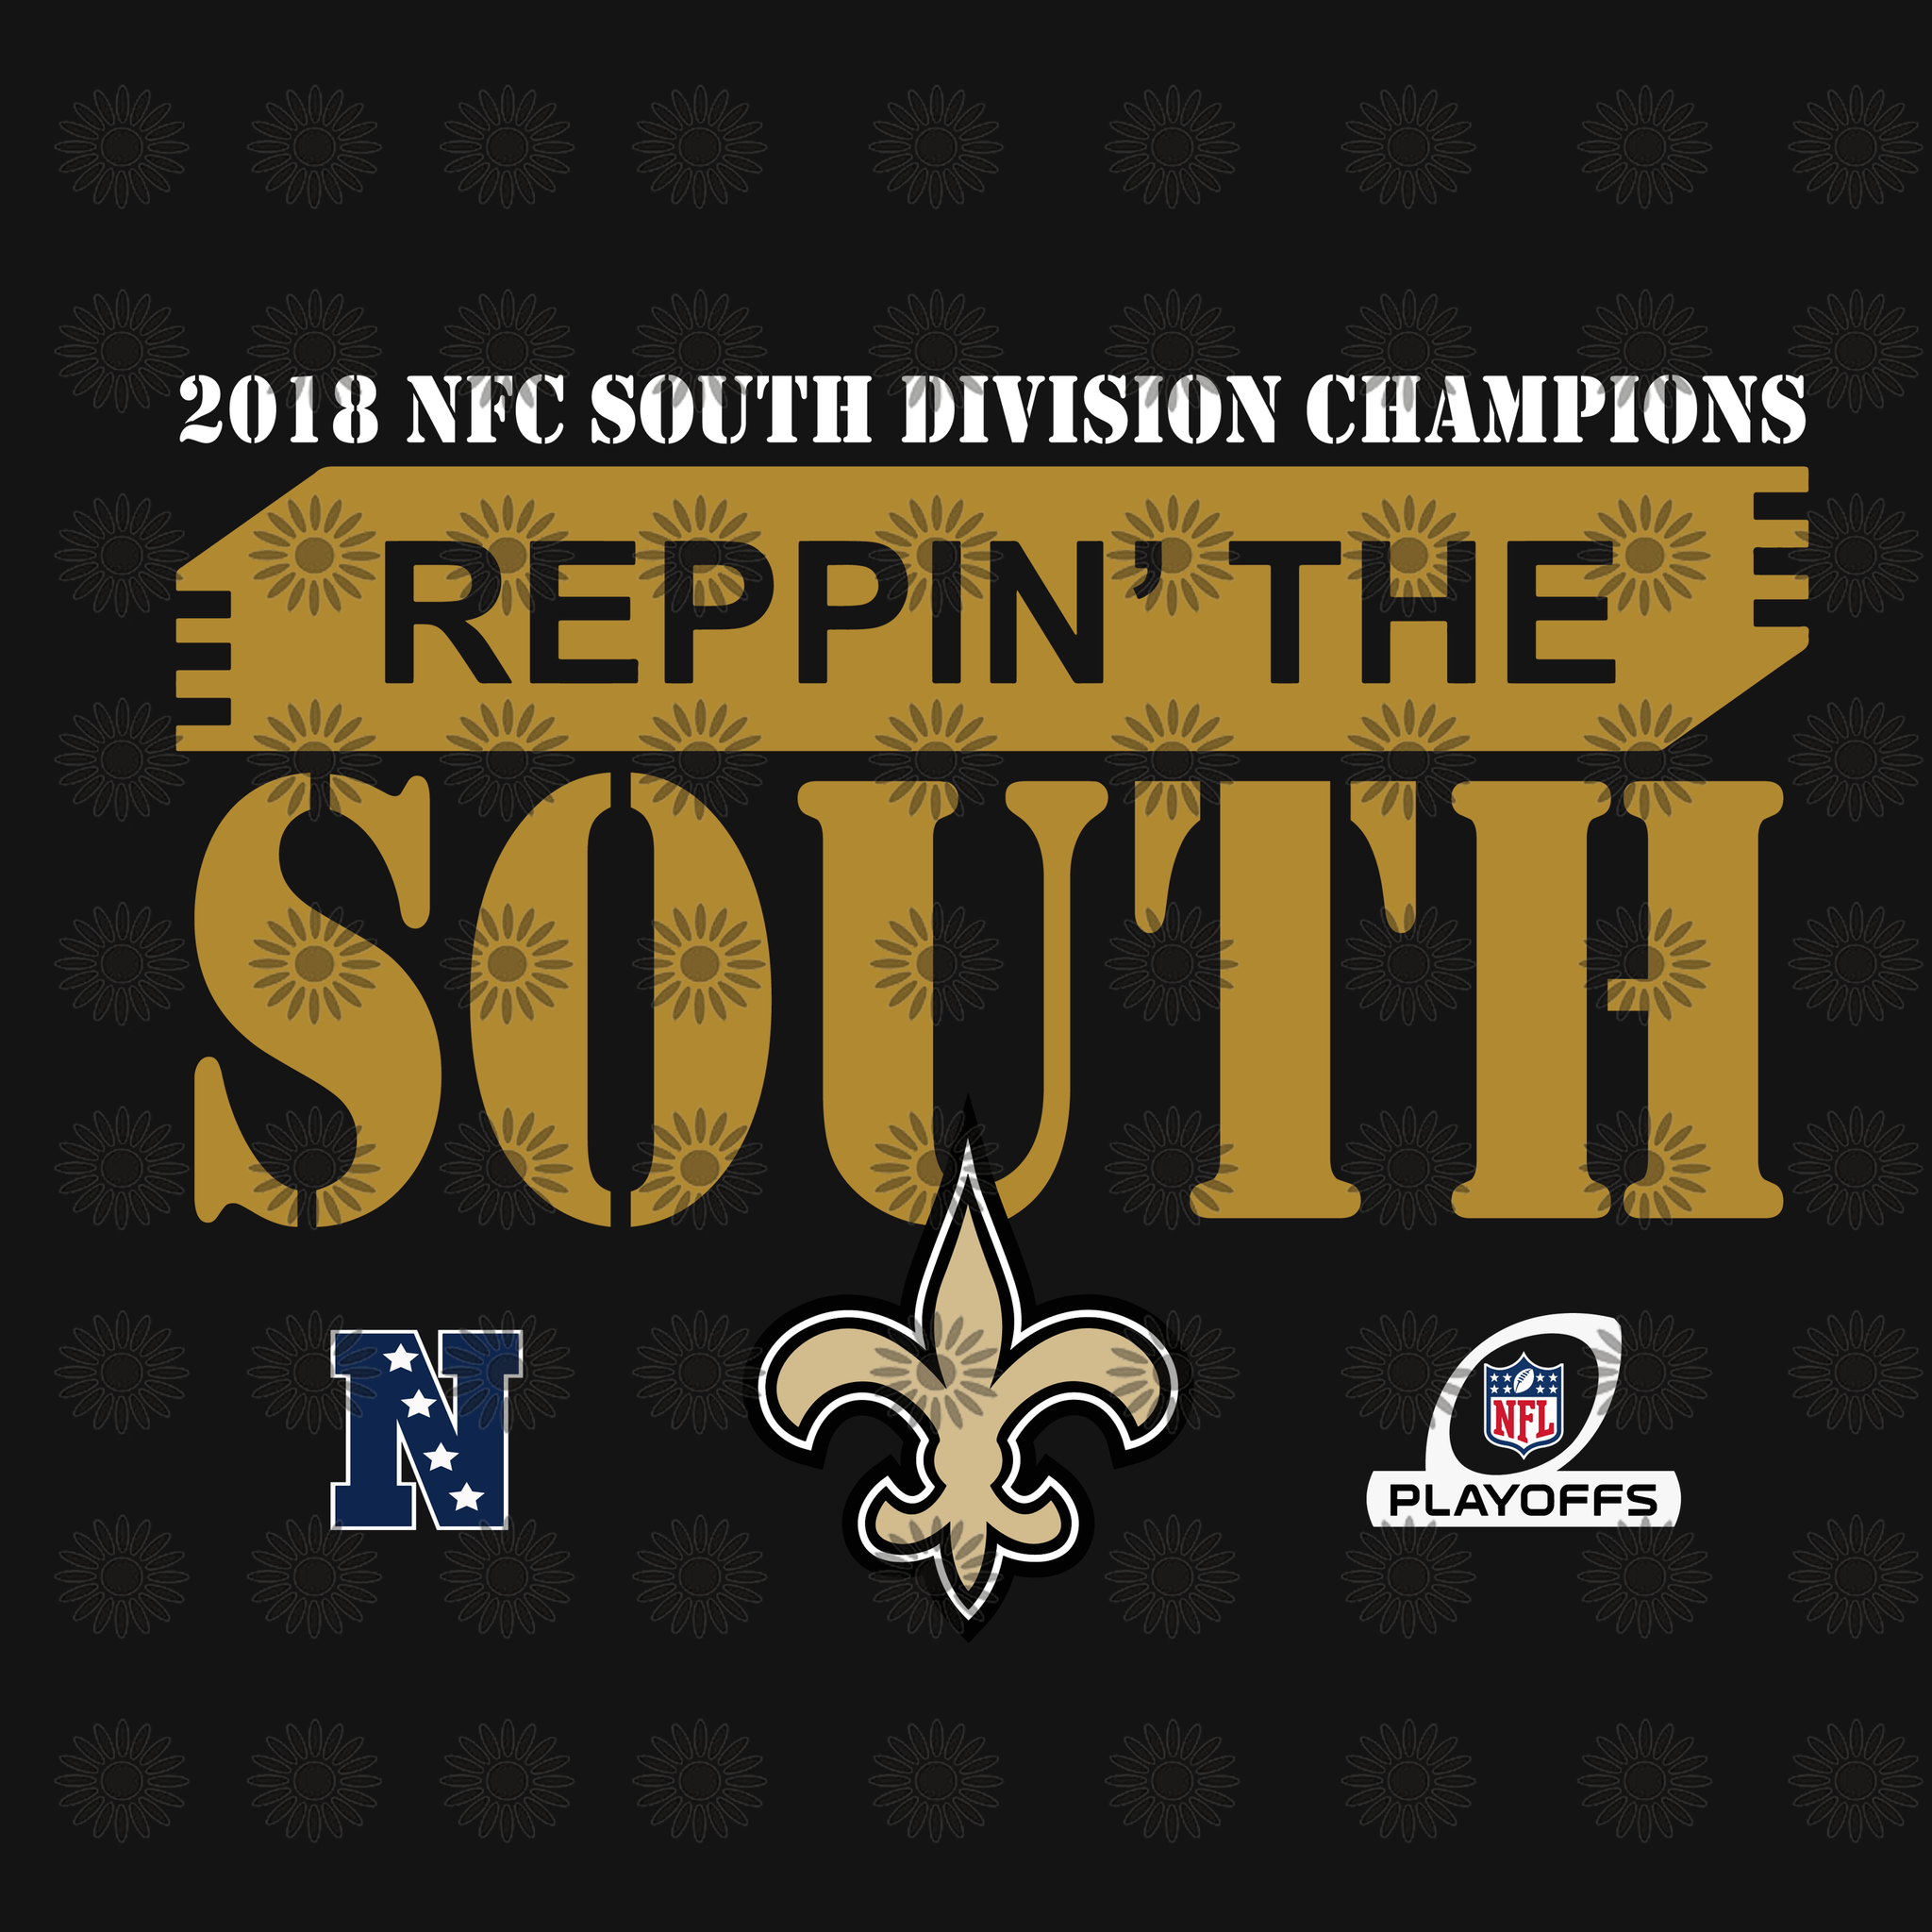 New Orleans Saints, New Orleans Saints svg, New Orleans Saints logo,skull Saints svg,New Orleans svg,png, dxf,eps file for Cricut,Silhouette